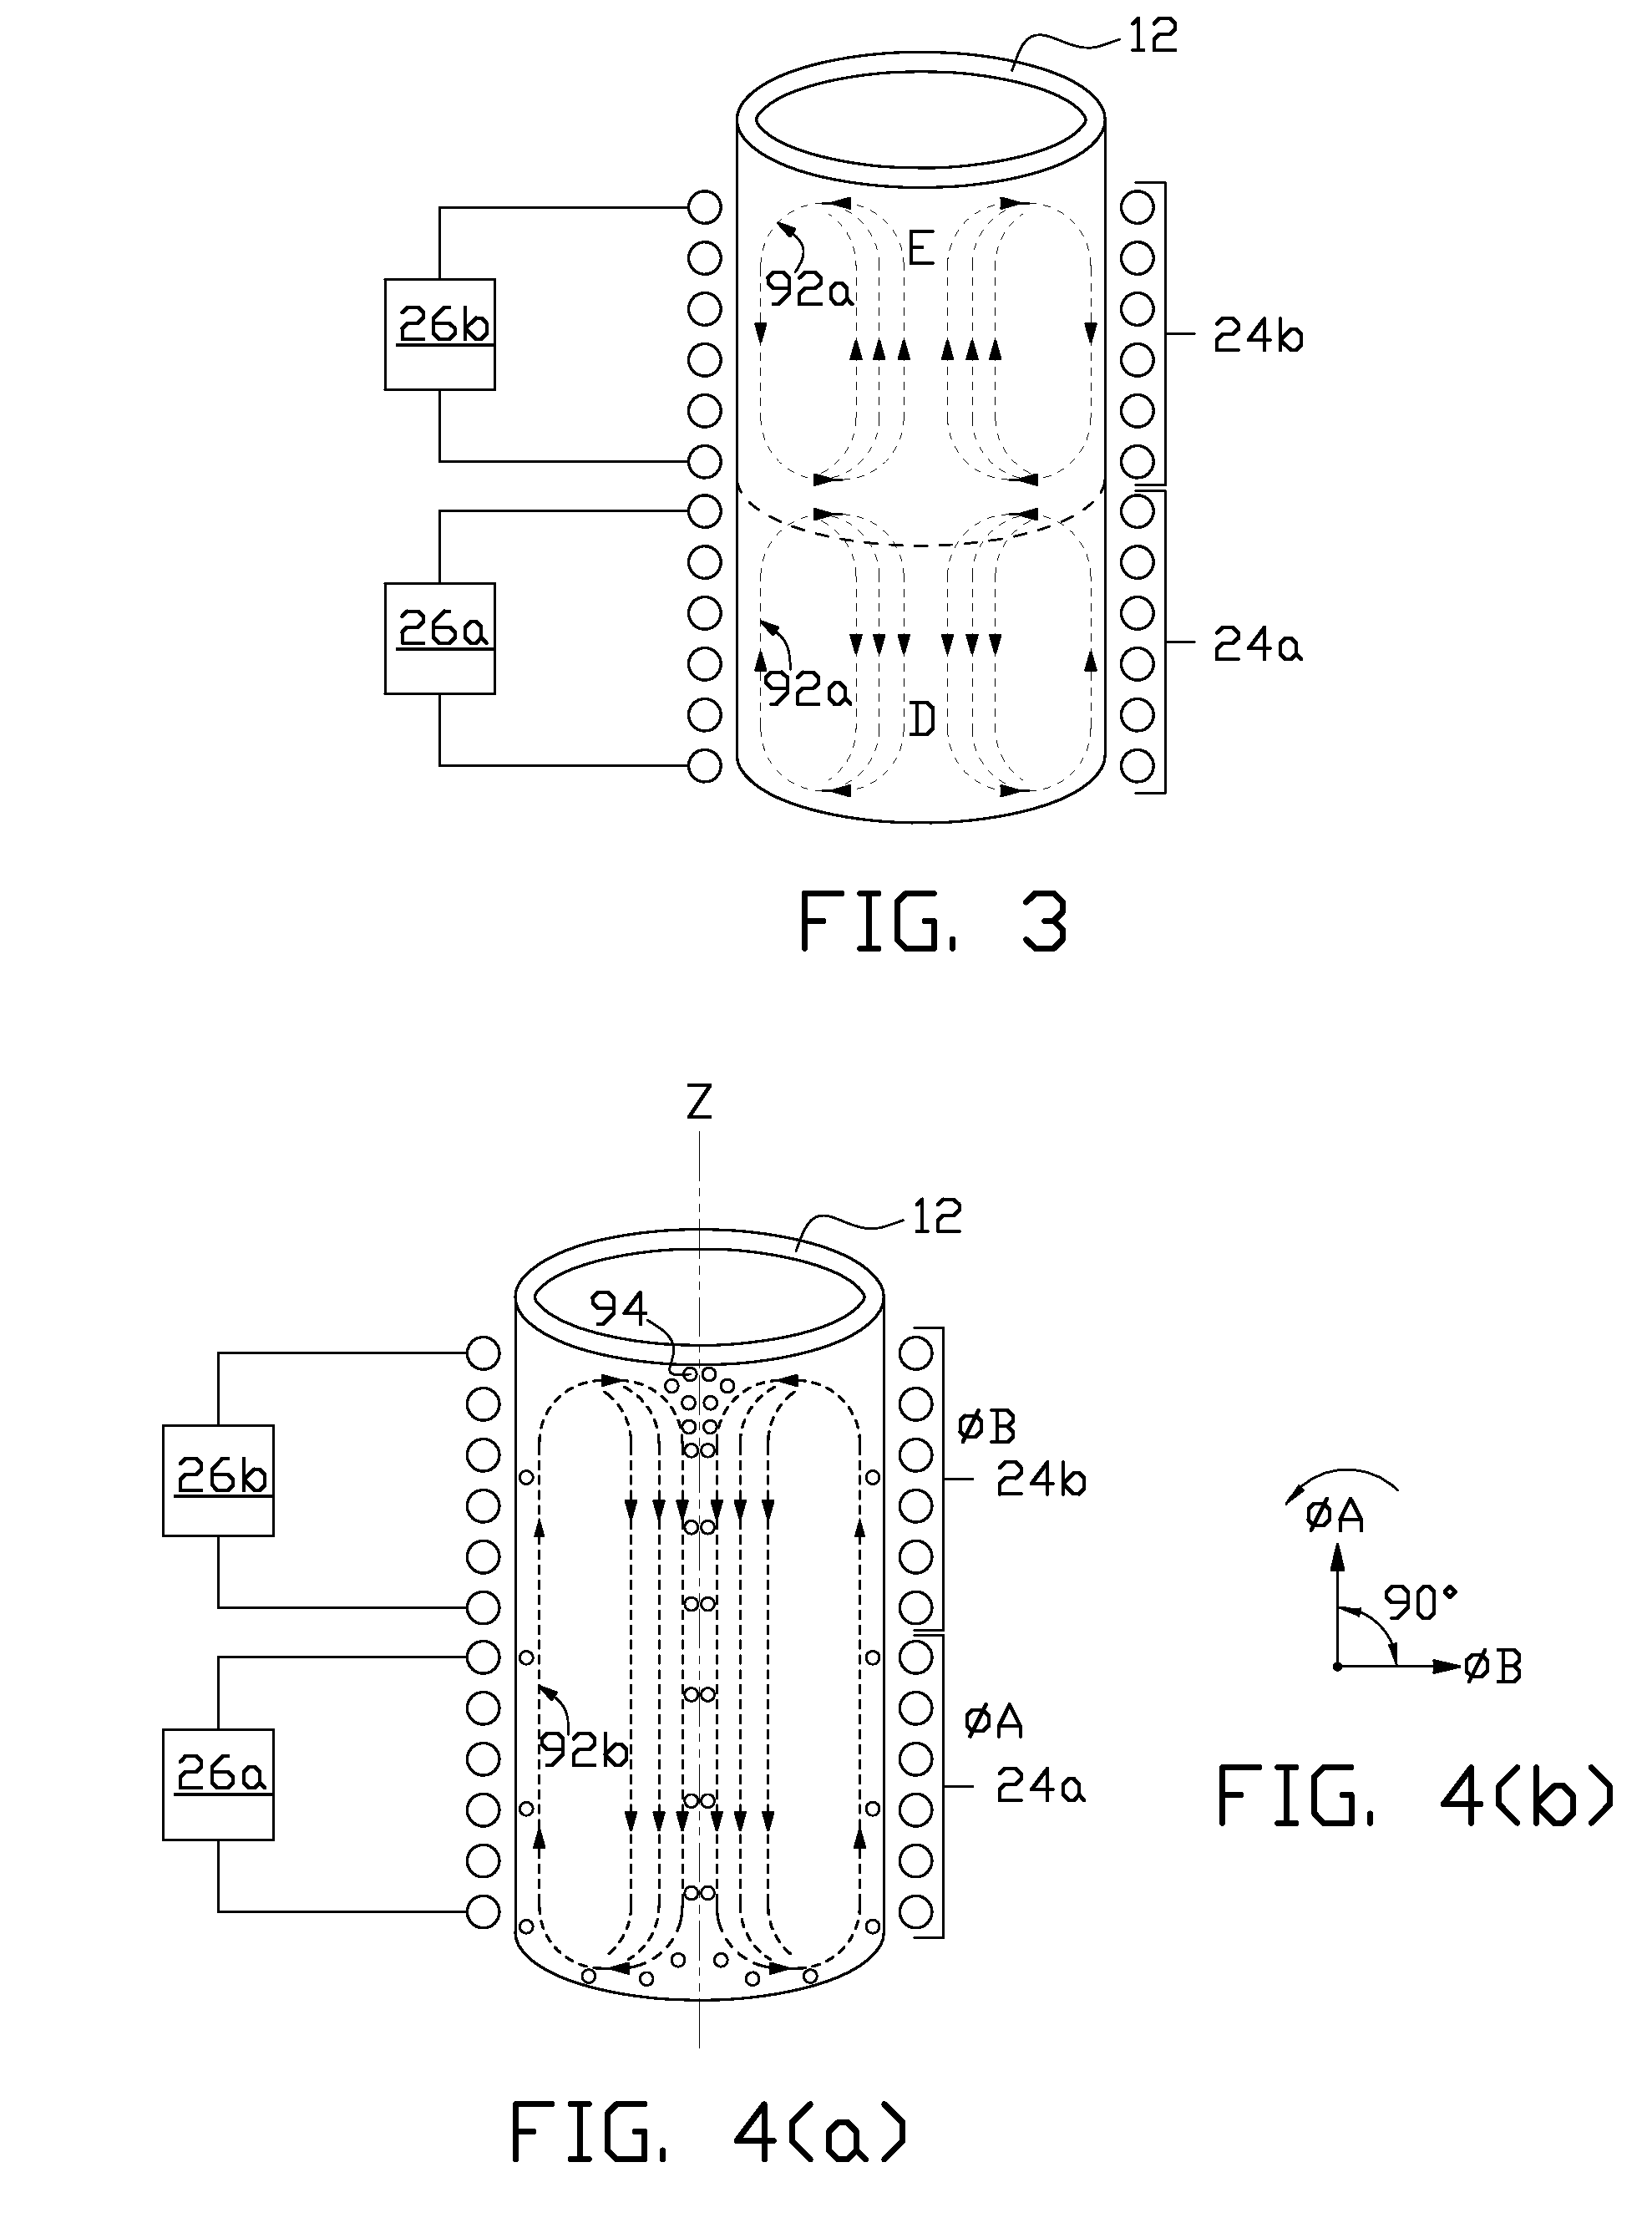 Melting and mixing of materials in a crucible by electric induction heel process